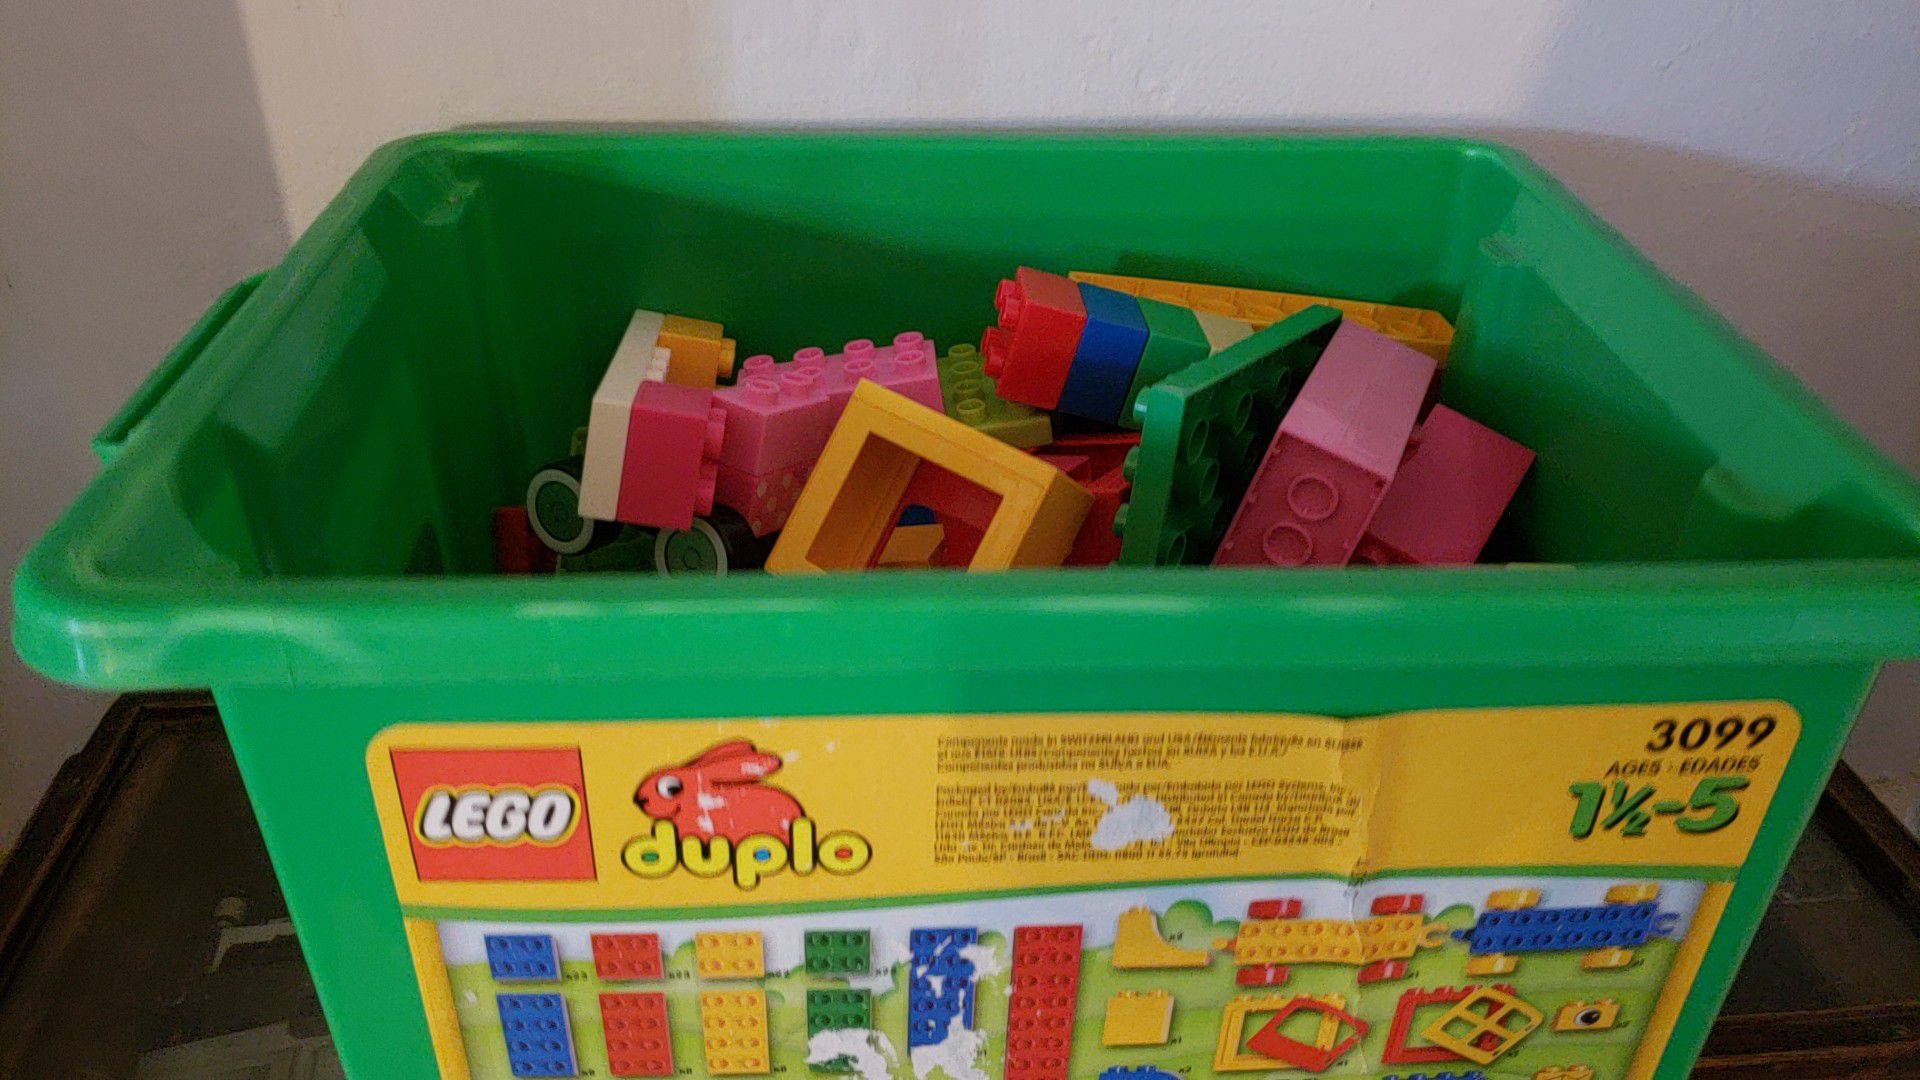 Lego duplo ages 1.5 to 5 years old